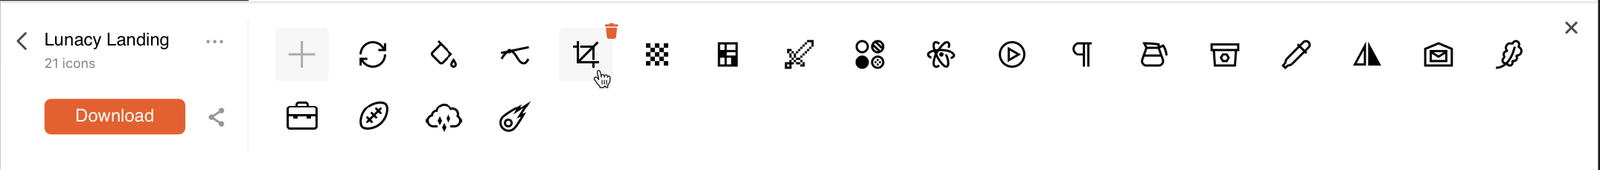 icons design user interface